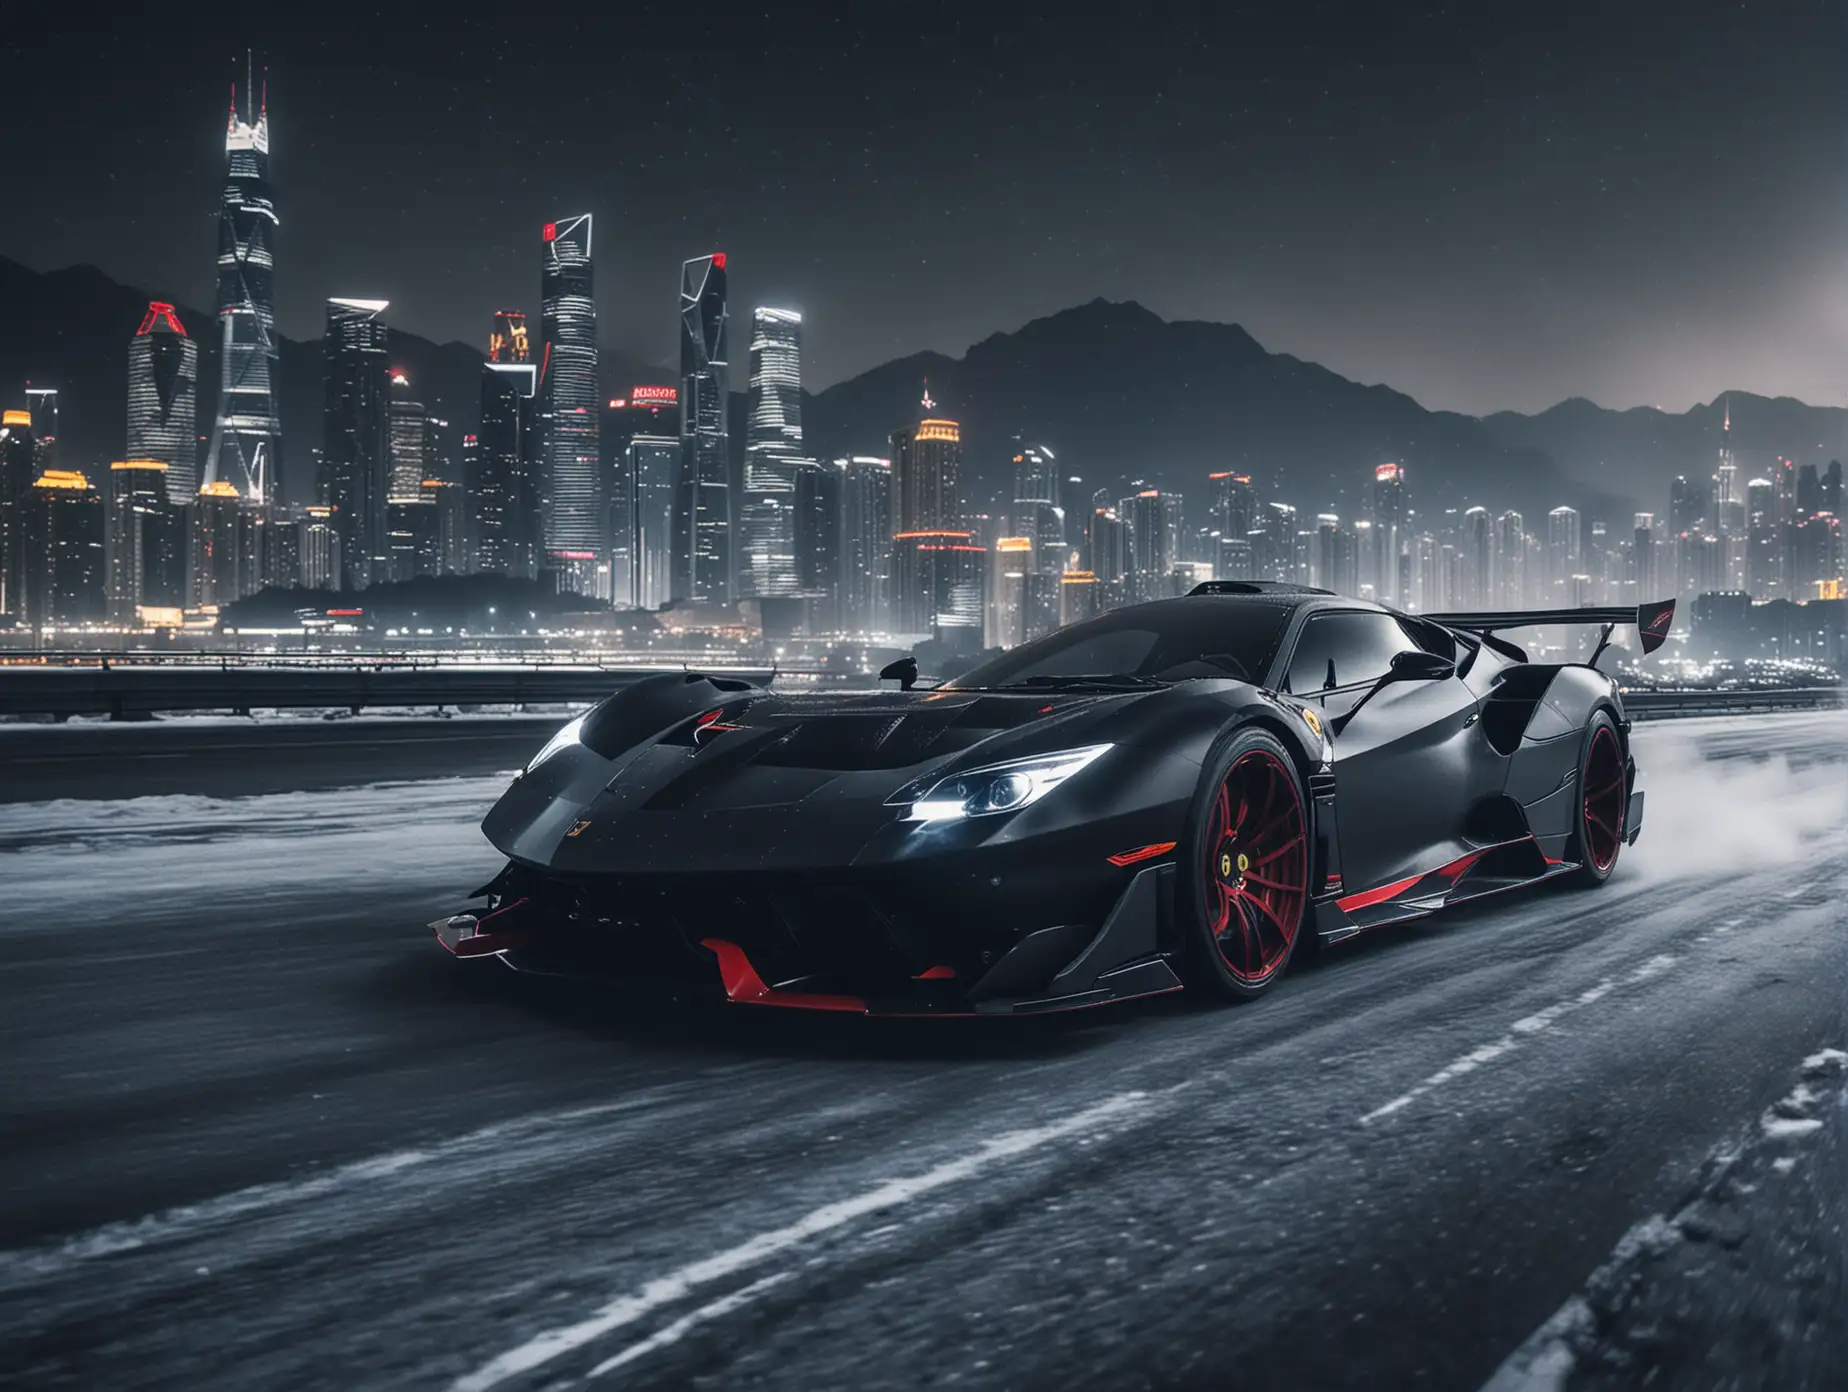 Create futuristic concept from Ferrari Daytona SP & Lamborghini Veneno tuning type monsters driving at night in the city Shanghai with mountains in background black dark color snow